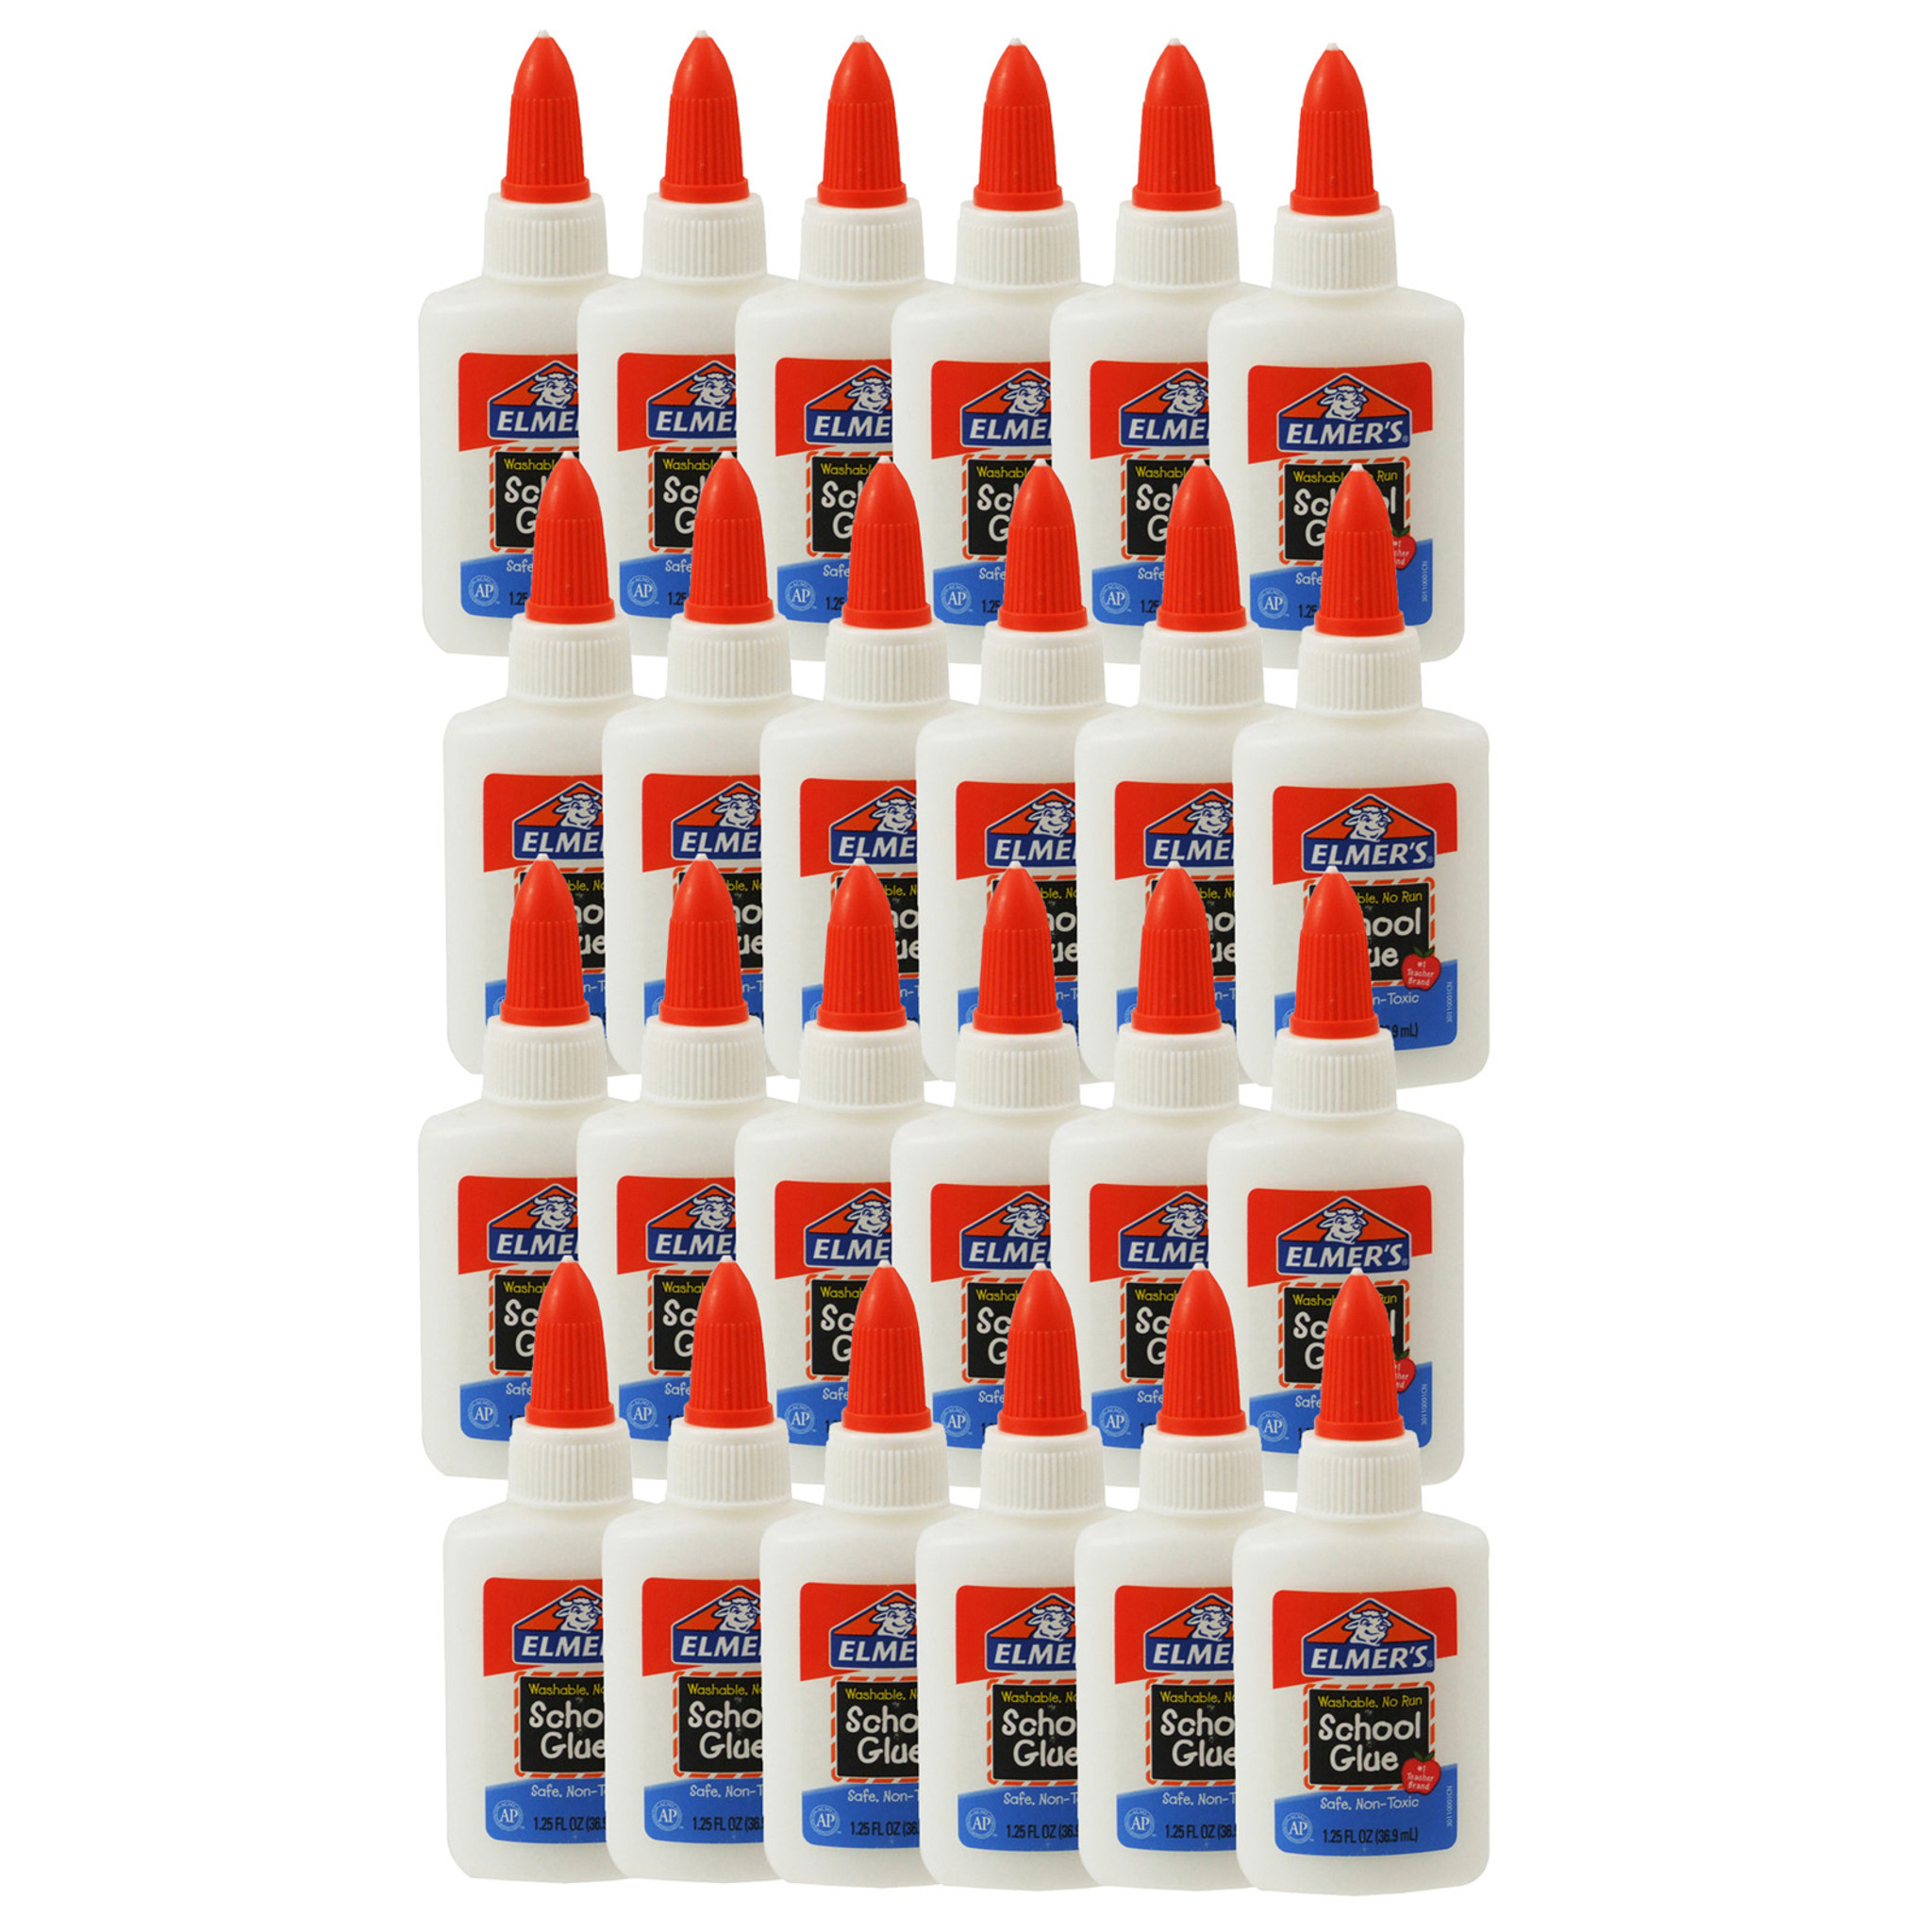 Elmer's Washable School Glue (4oz) New As Seen In Picture Lot Of 12